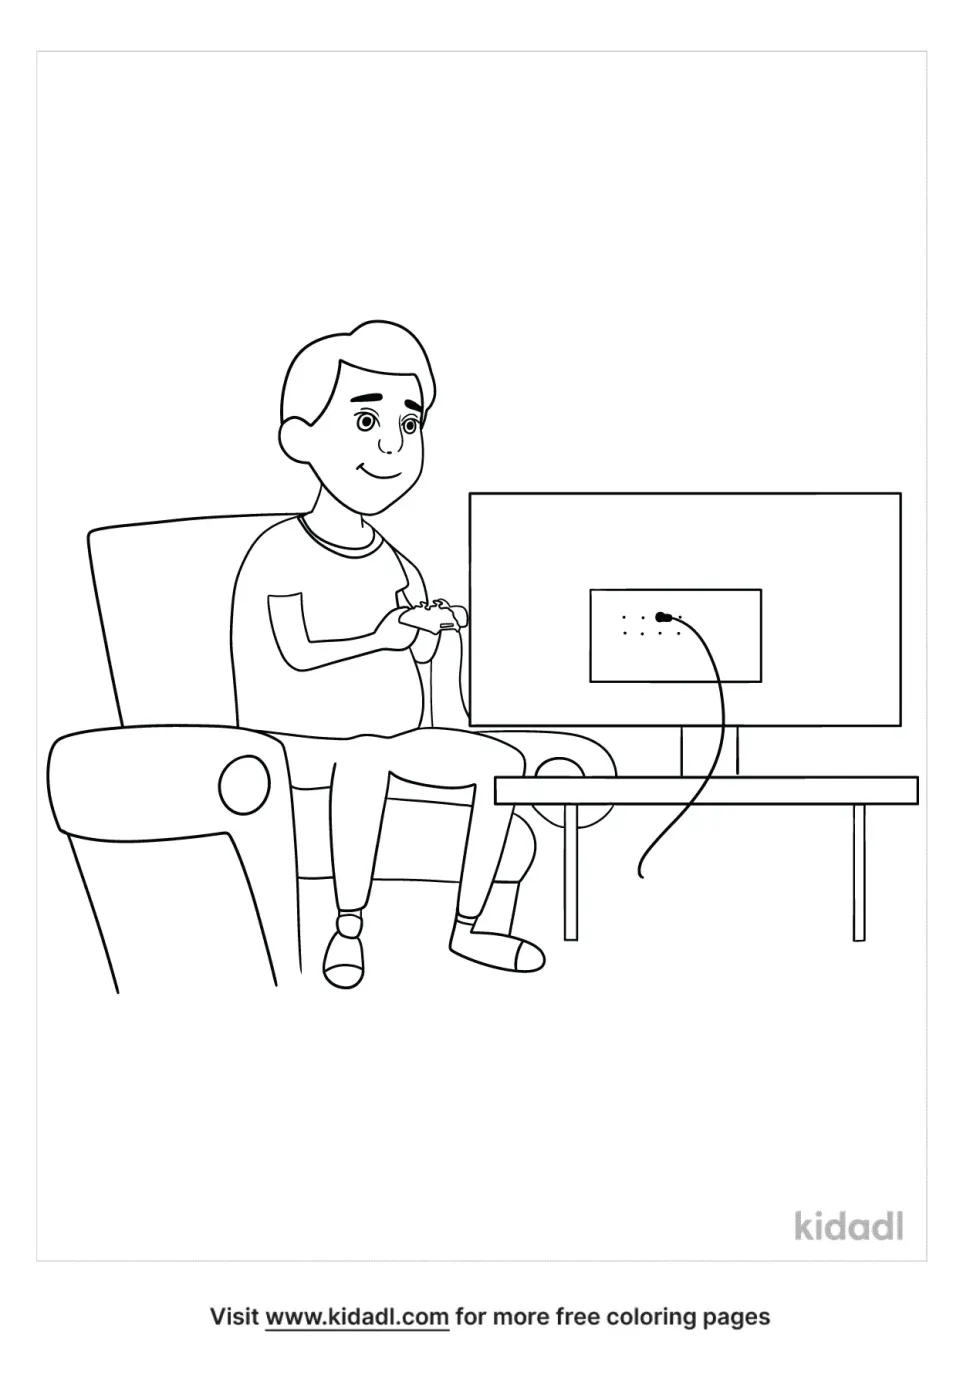 Kids Playing Video Games Coloring Page